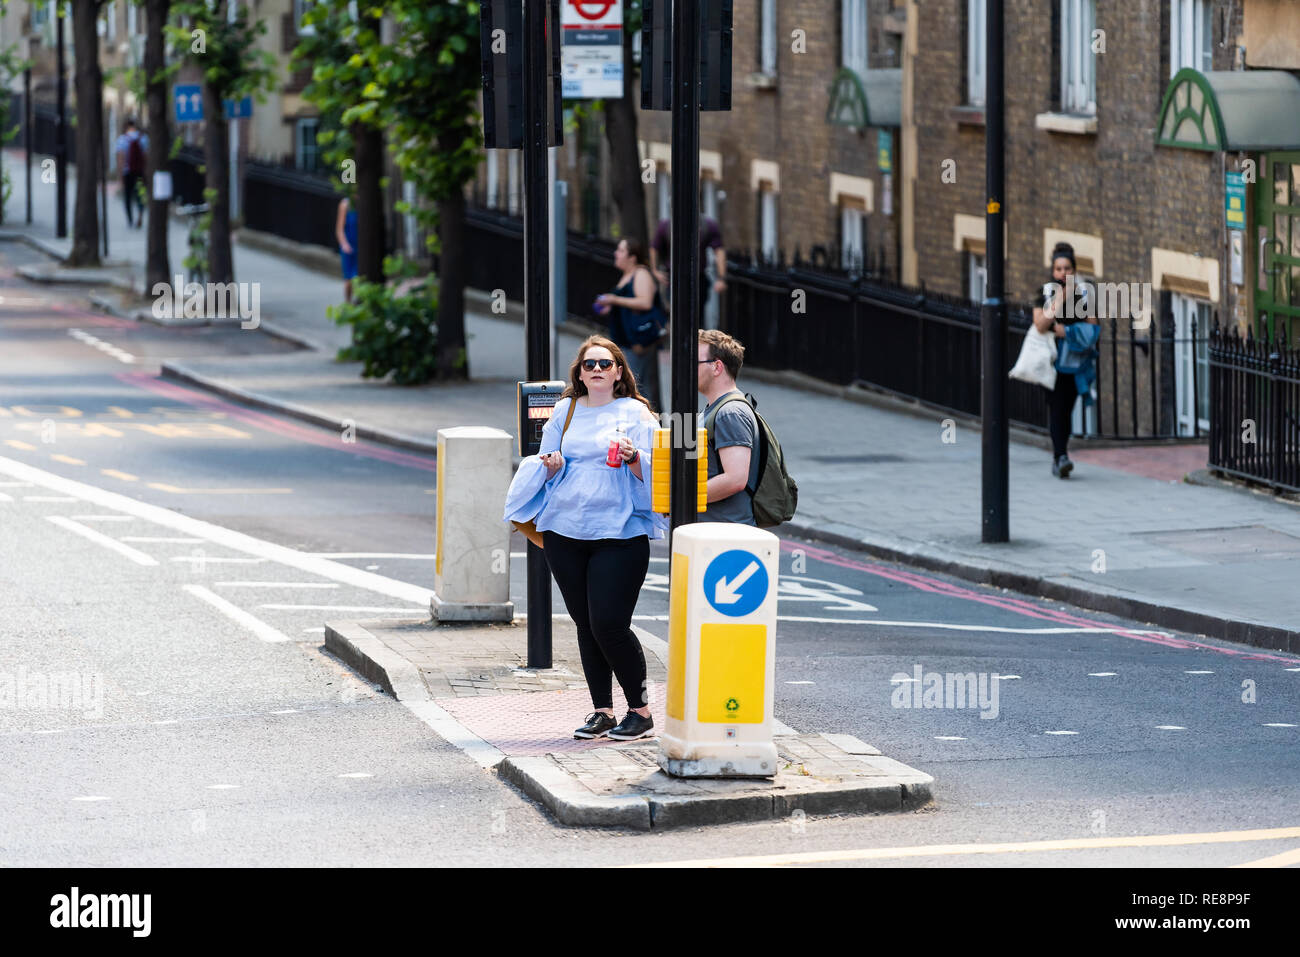 London, UK - June 22, 2018: High angle view of street with people standing waiting to cross road in city Stock Photo